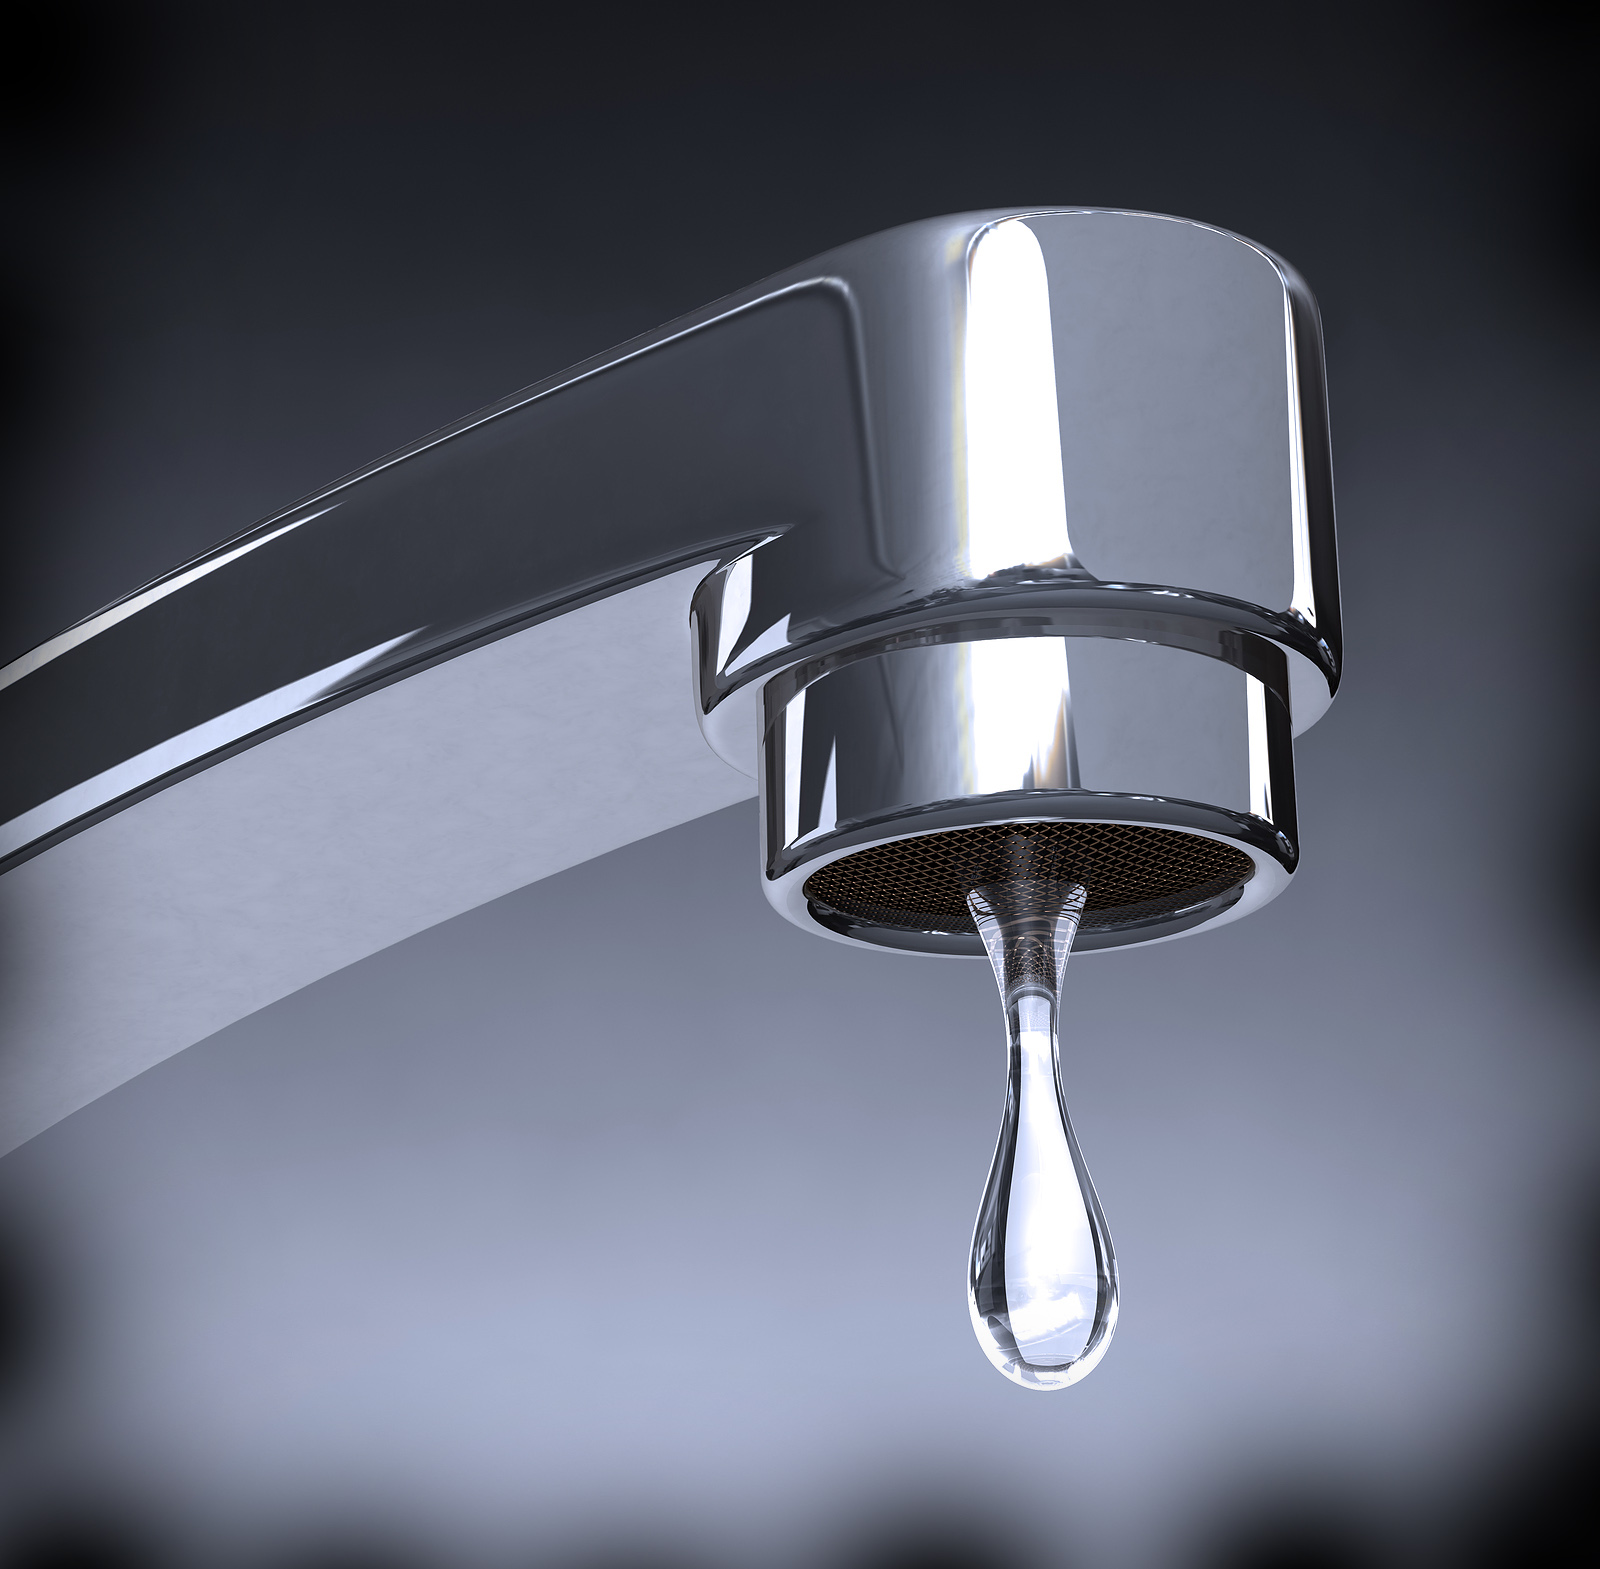 A water Emergency Drainage Services in Ampthill depicted by a photograph of a faucet with a droplet.